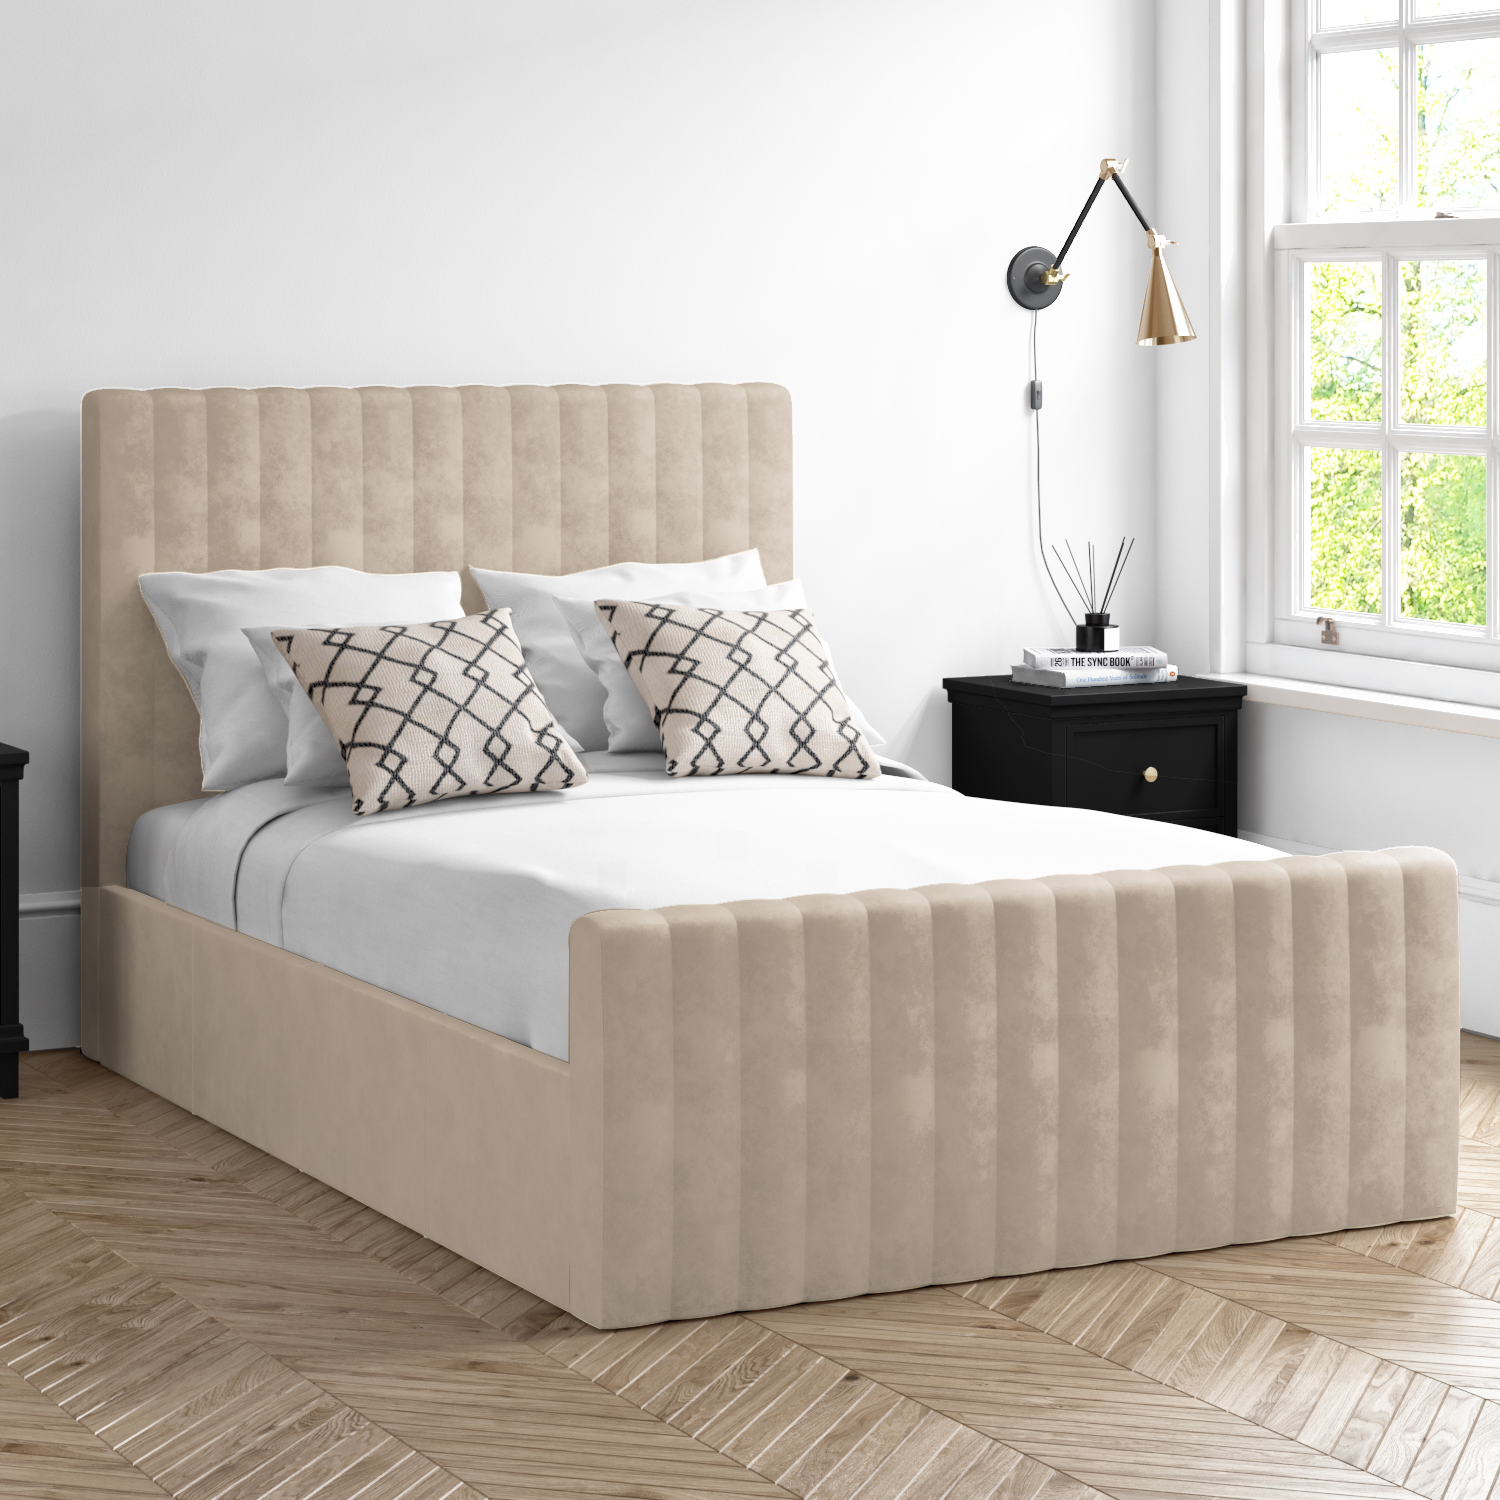 Read more about Side opening beige velvet king size ottoman bed khloe